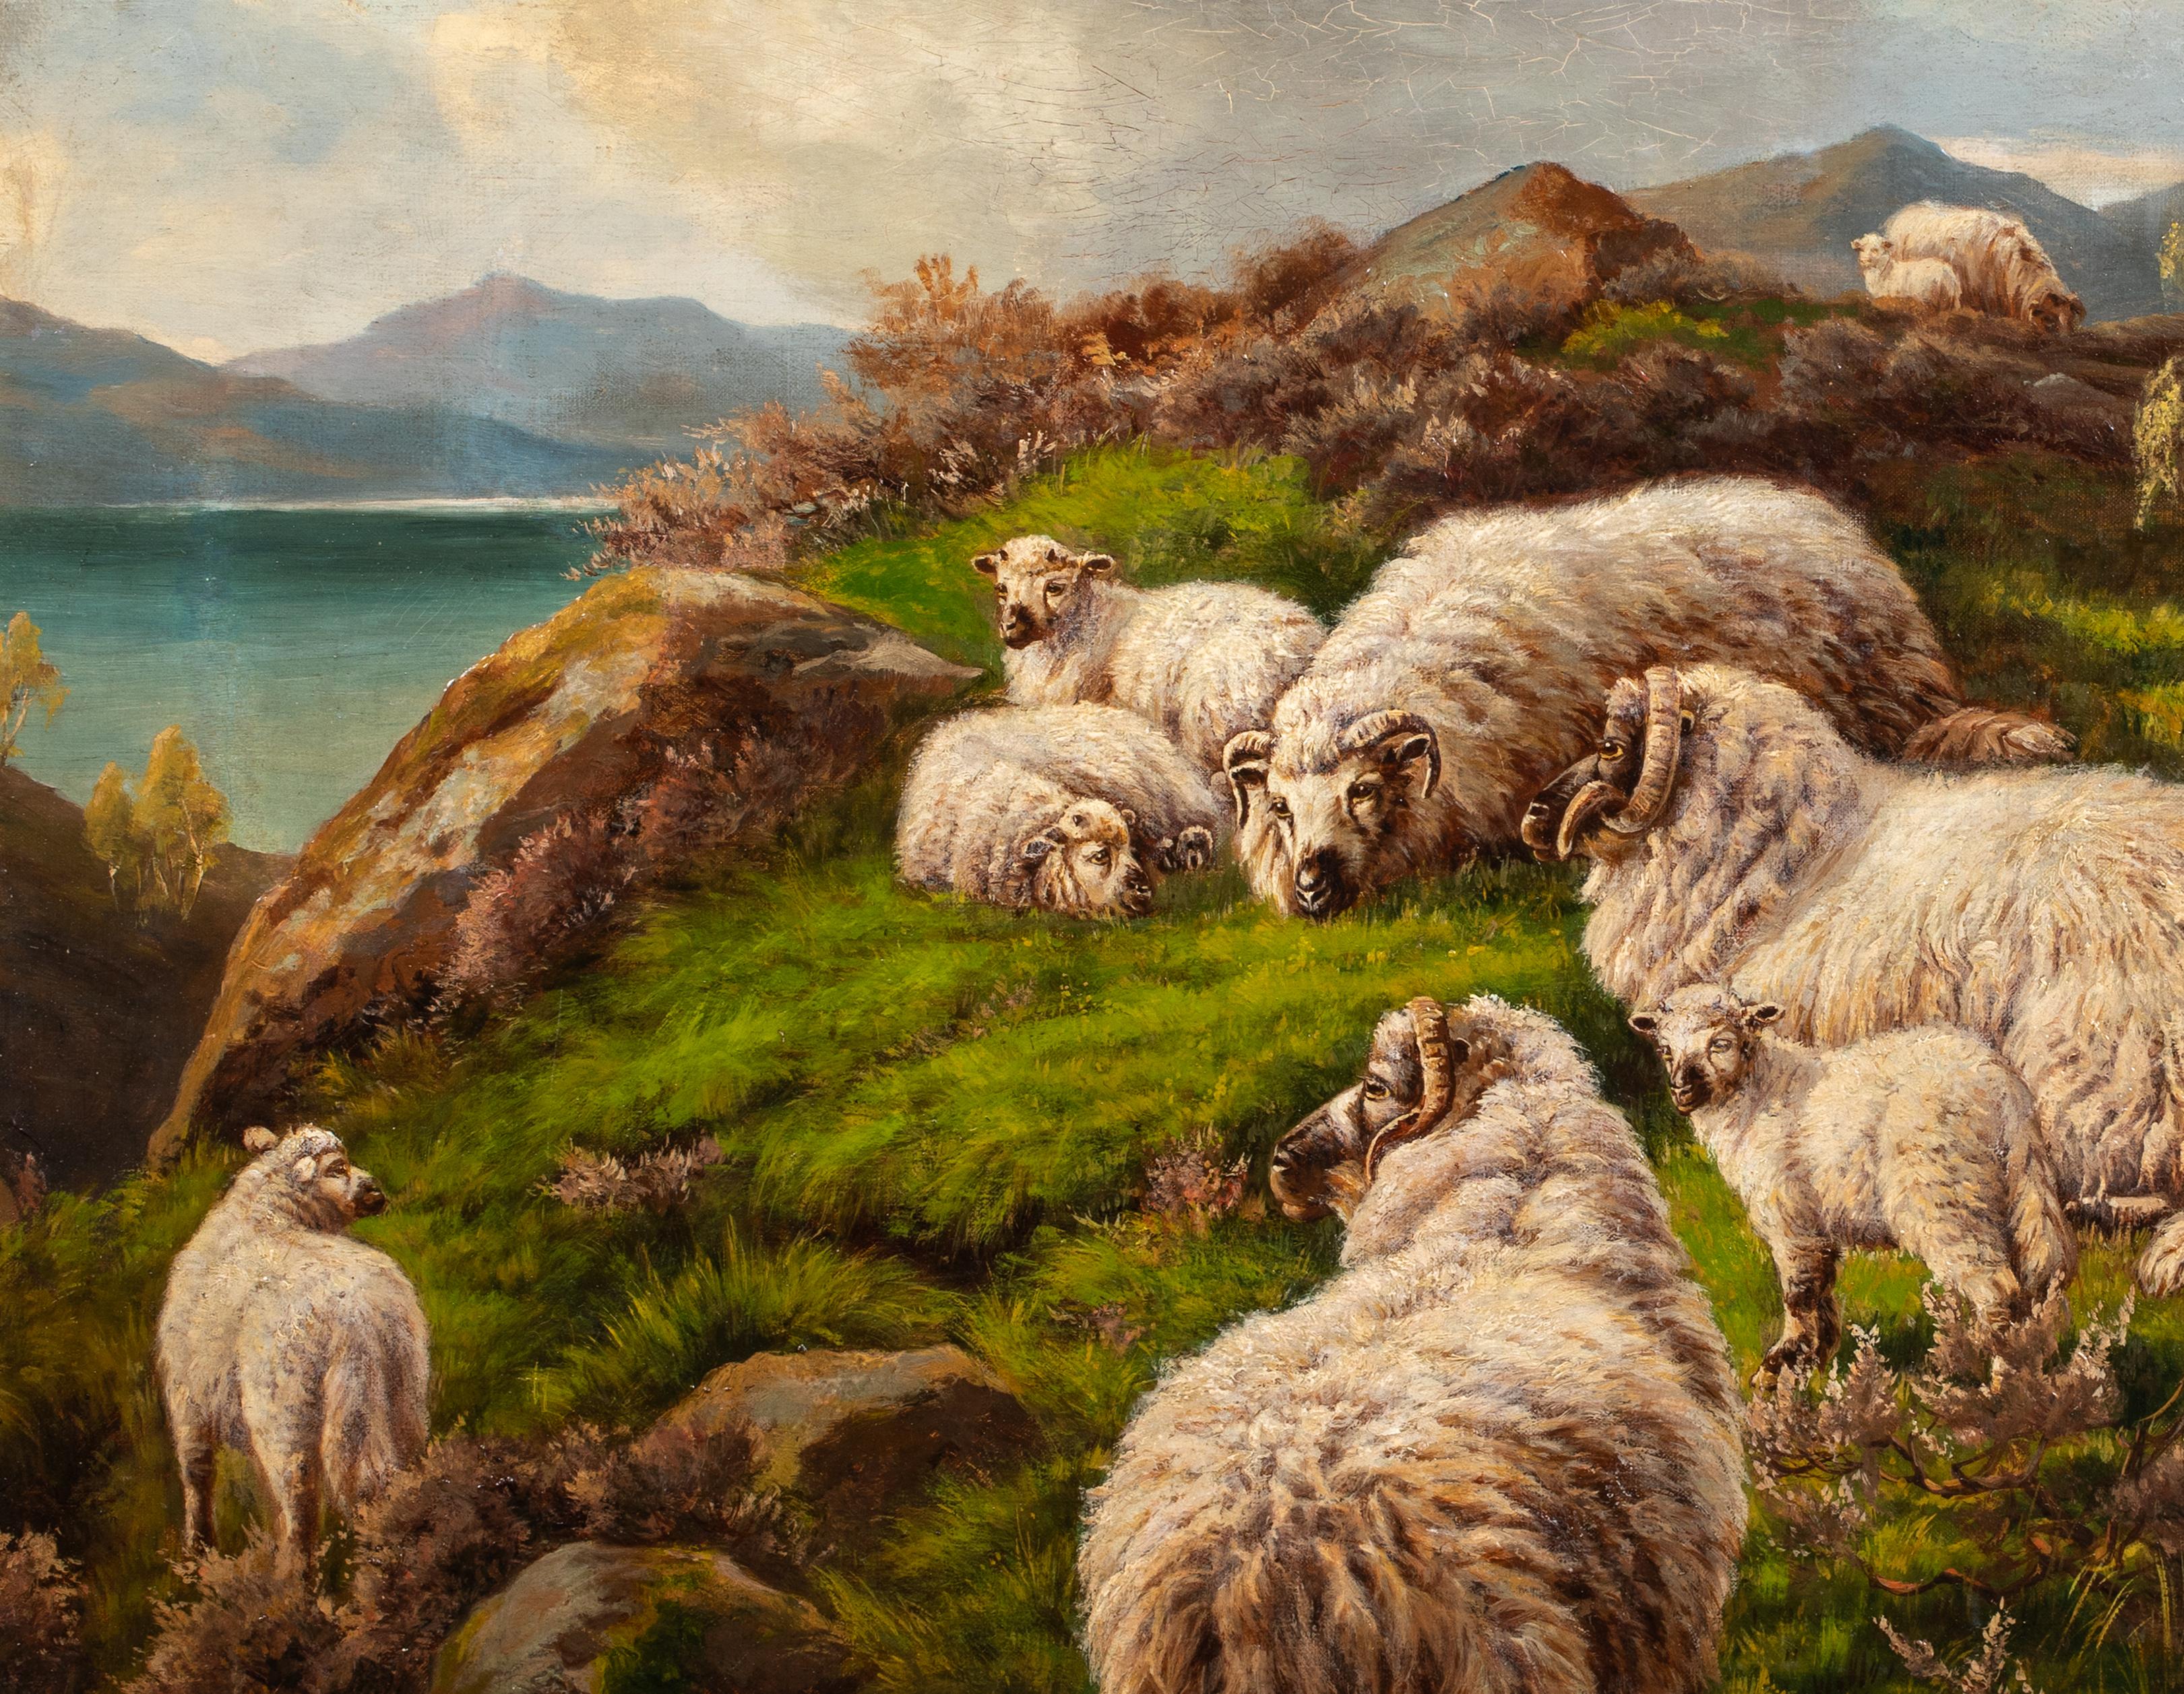 Highland Sheep Resting By Loch Lomond, 19th Century

by ROBERT WATSON (1865-1916)

Large 19th Century Scottish Highland scene of sheep resting by the Loch, oil on canvas by Robert Watson. Excellent quality and condition example of the famous